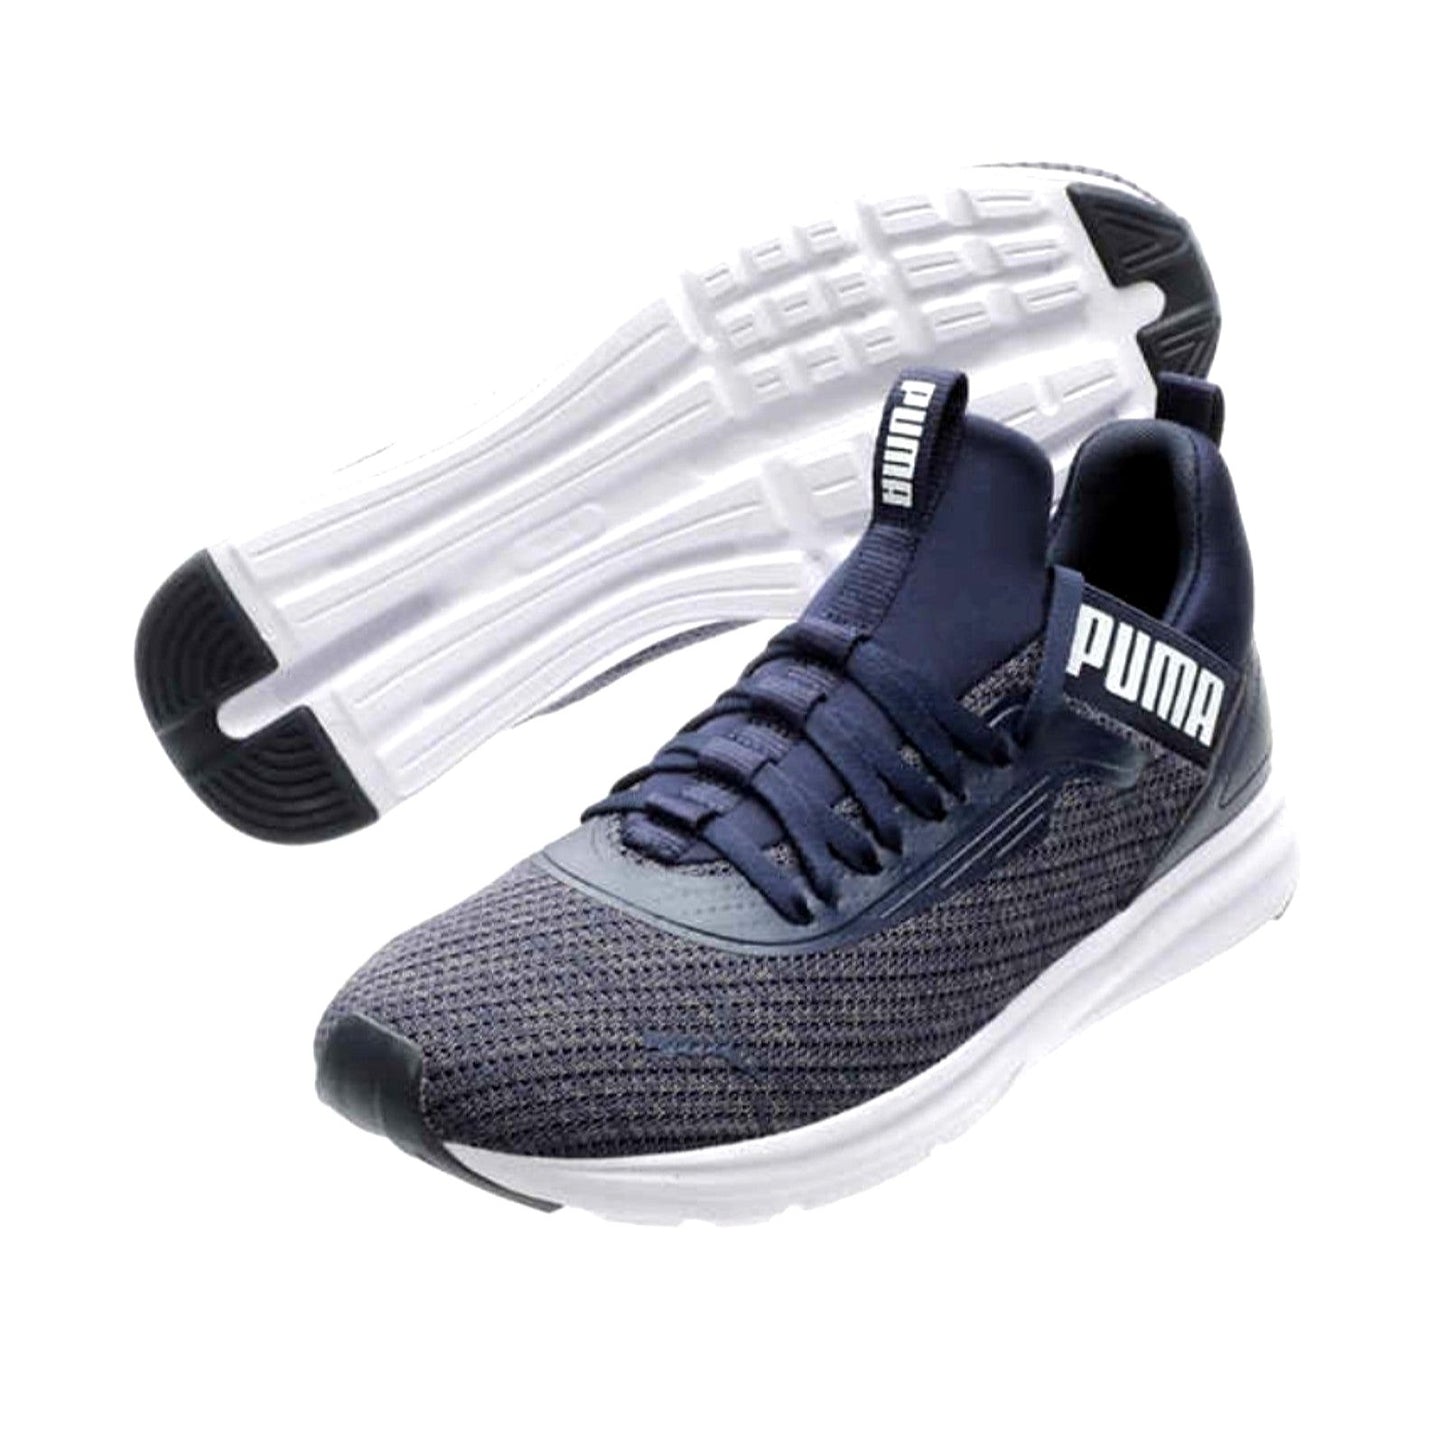 PUMA Sneakers Men's Athletic Enzo Beta V3 Slip-on Activewear shoes